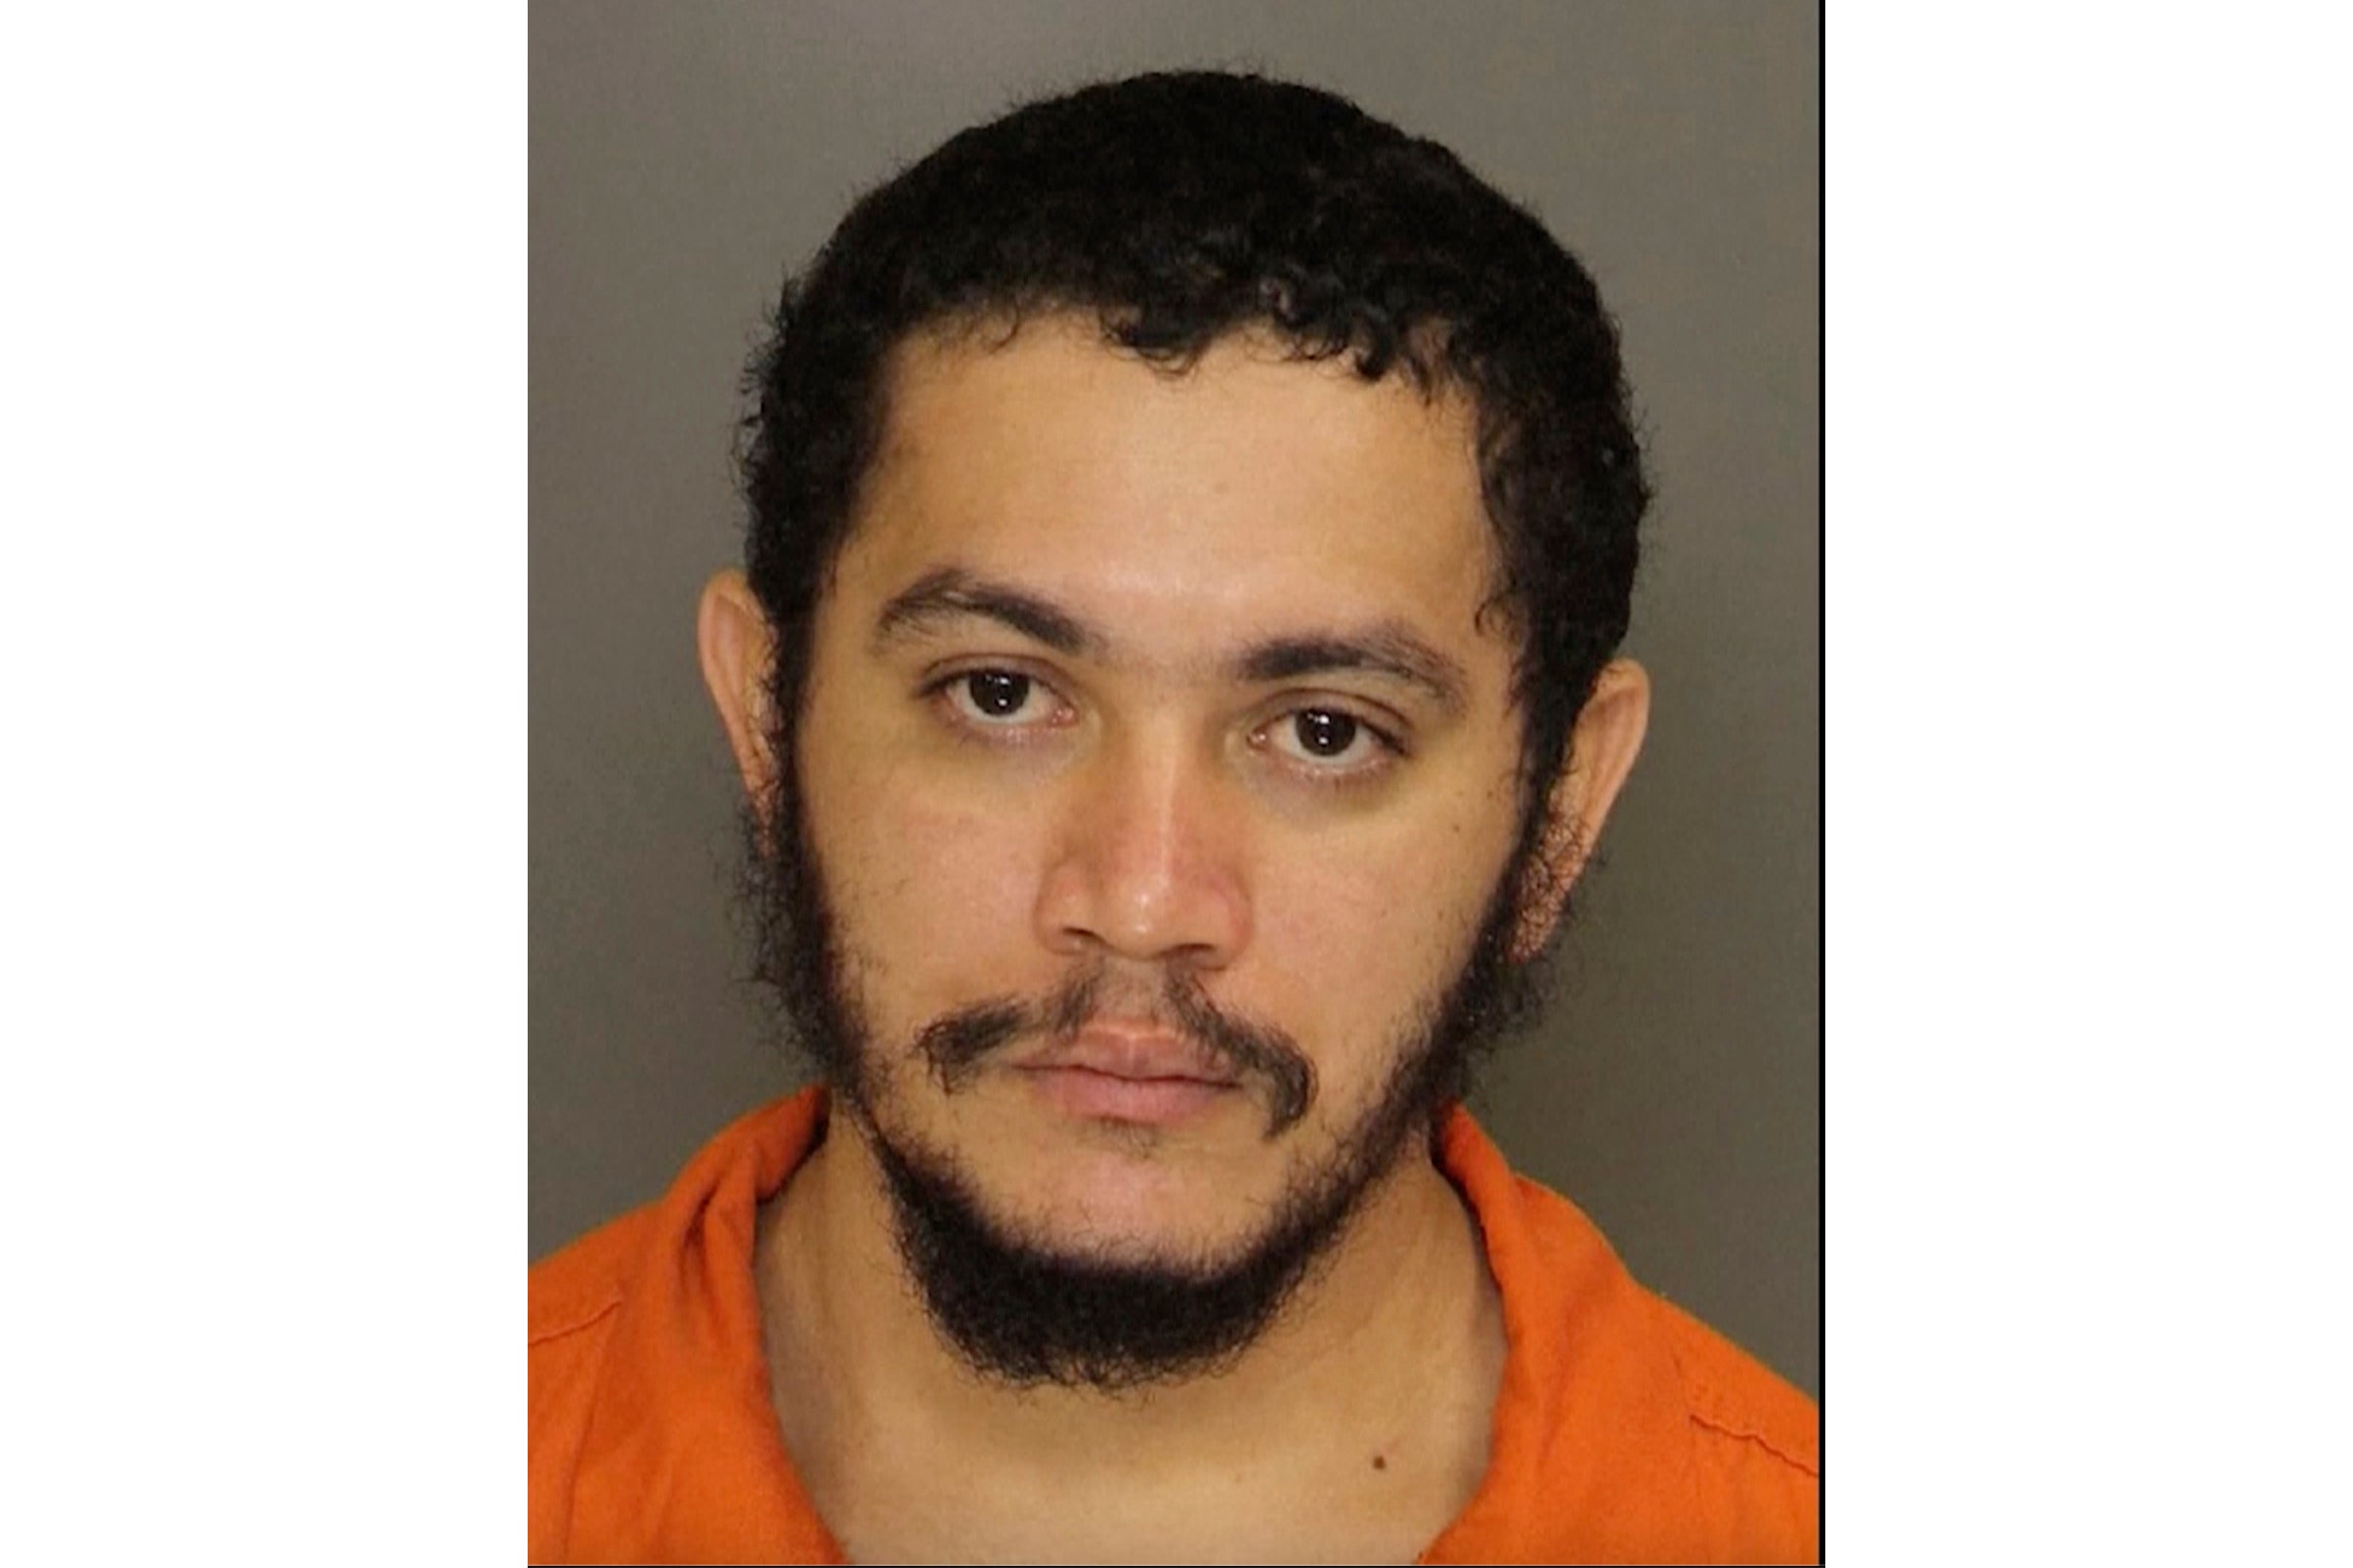 This photo provided by the Chester County Prison shows Danelo Cavalcante. Cavalcante was sentenced to prison last month for the April 2021 murder of his girlfriend